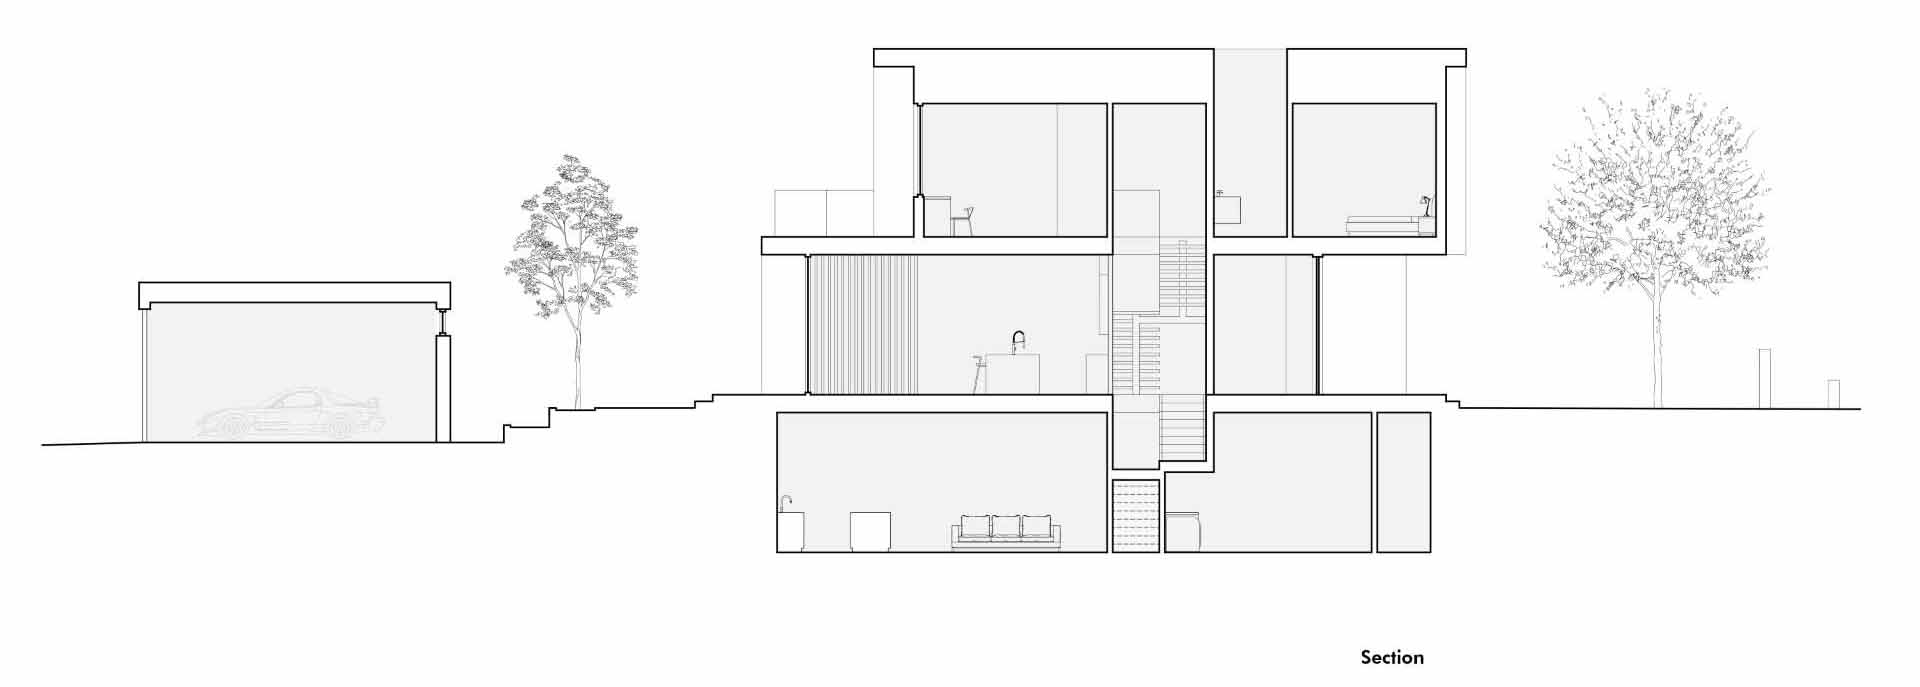 An architectural drawing of a modern three storey home.